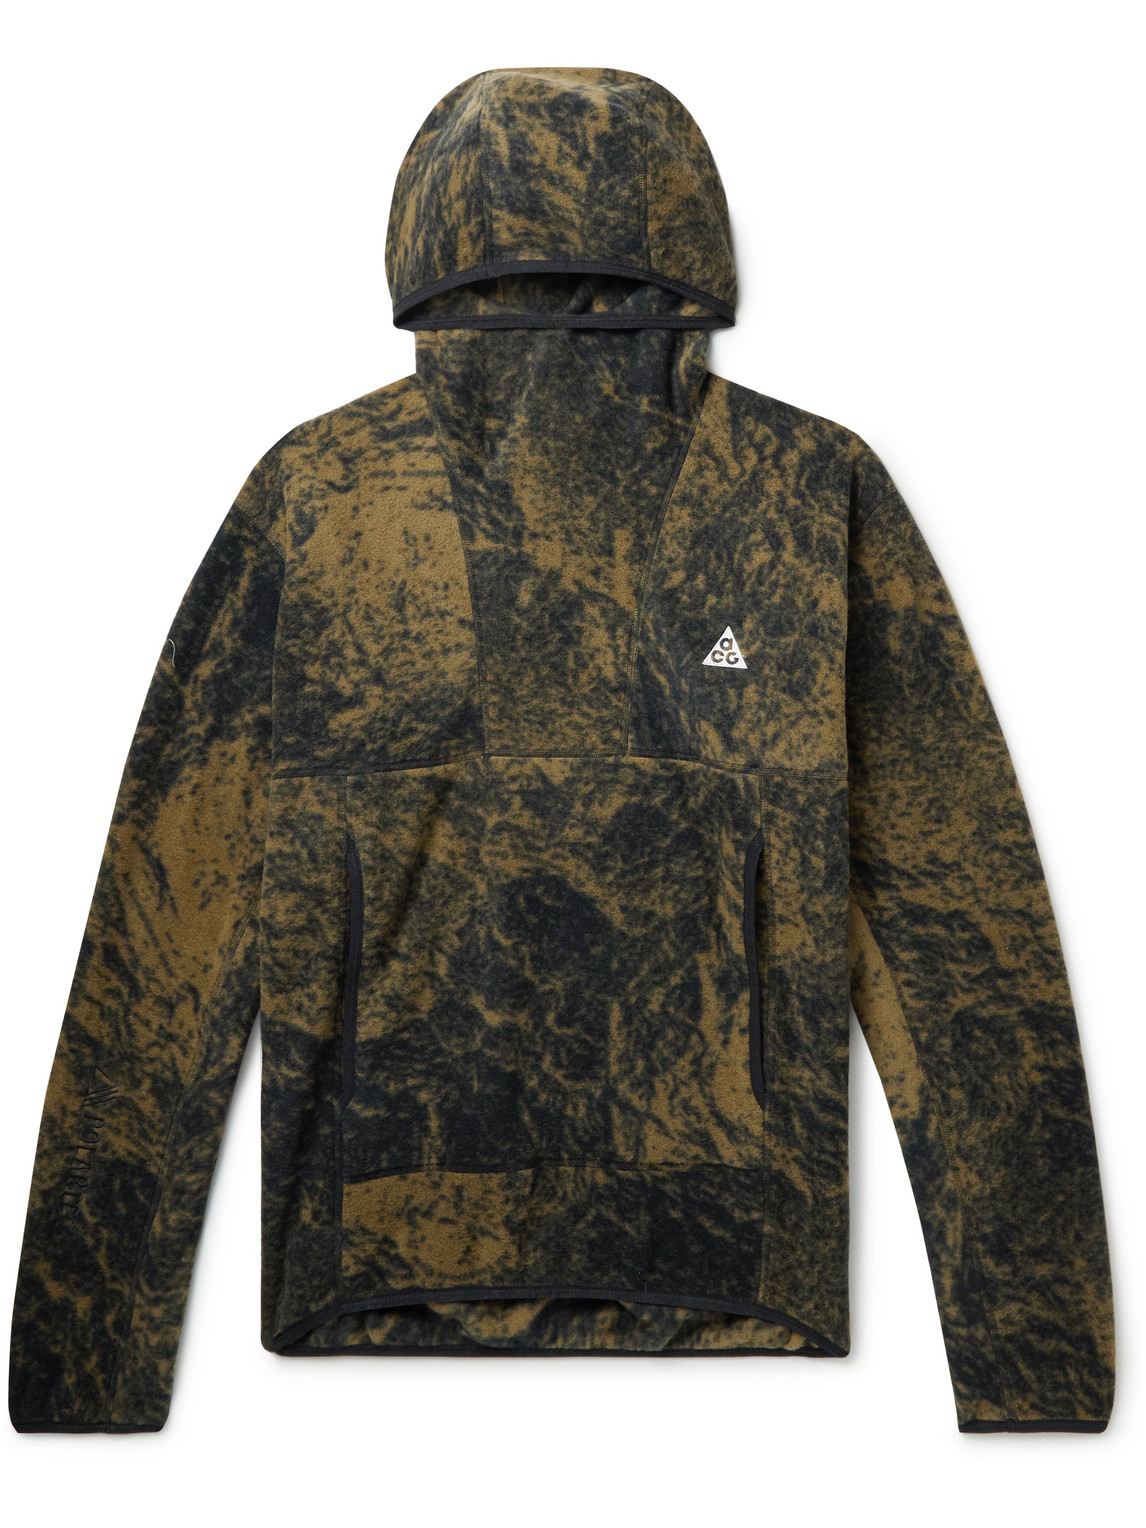 ACG NRG Wolf Tree Printed Recycled Polartec Therma-FIT Hoodie